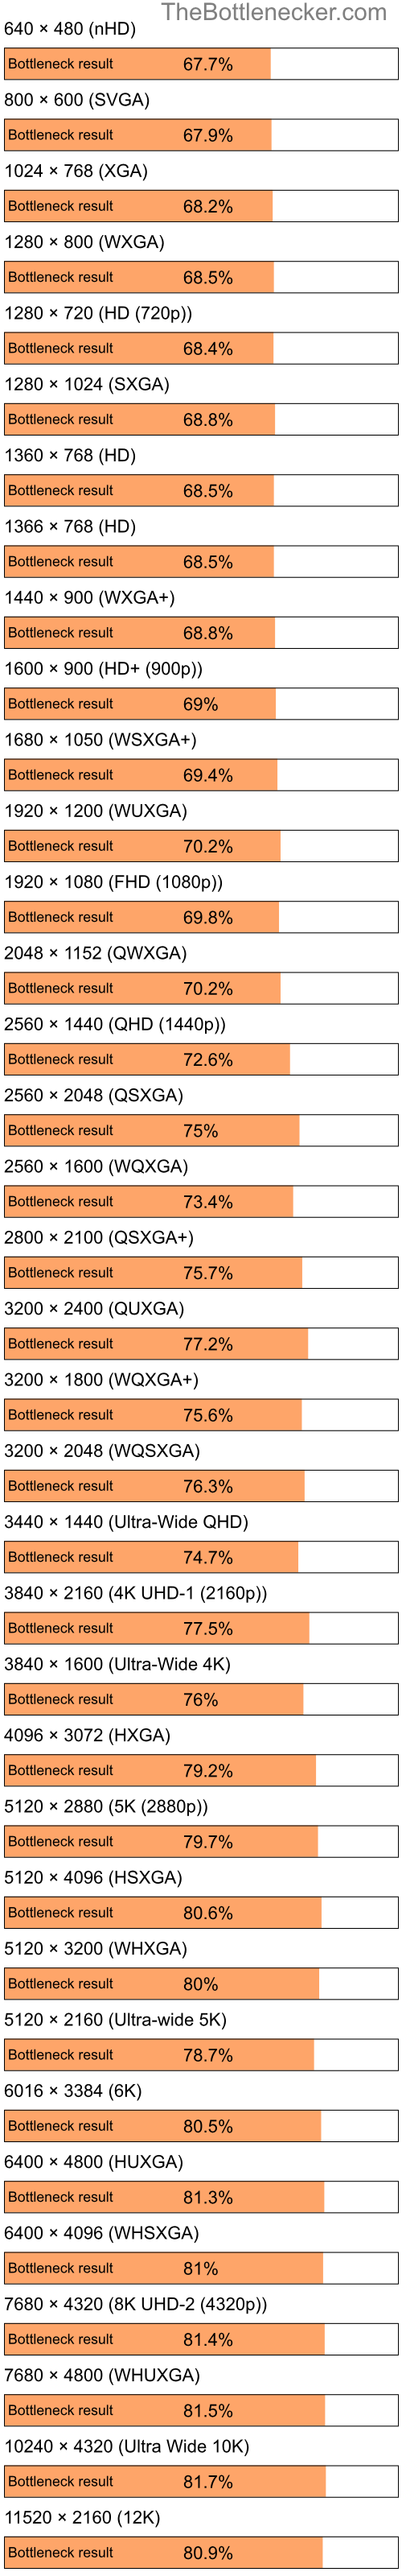 Bottleneck results by resolution for Intel Celeron M 410 and AMD FirePro 2260 in Graphic Card Intense Tasks